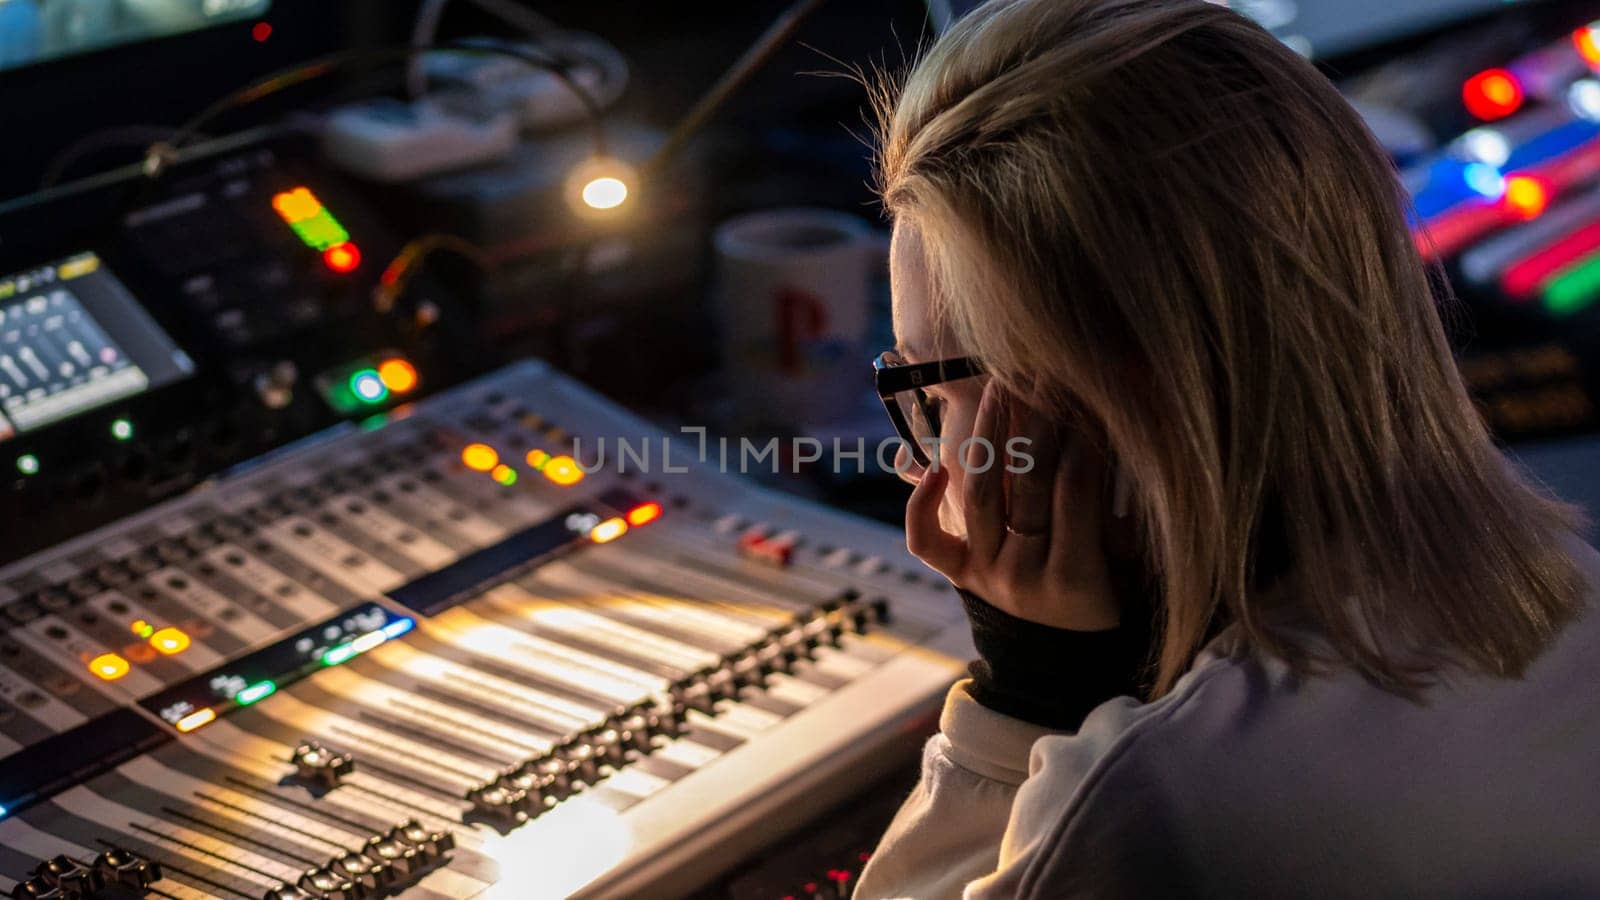 Russia October 2020. the girl sound engineer works works on the broadcast at the sound console. low light